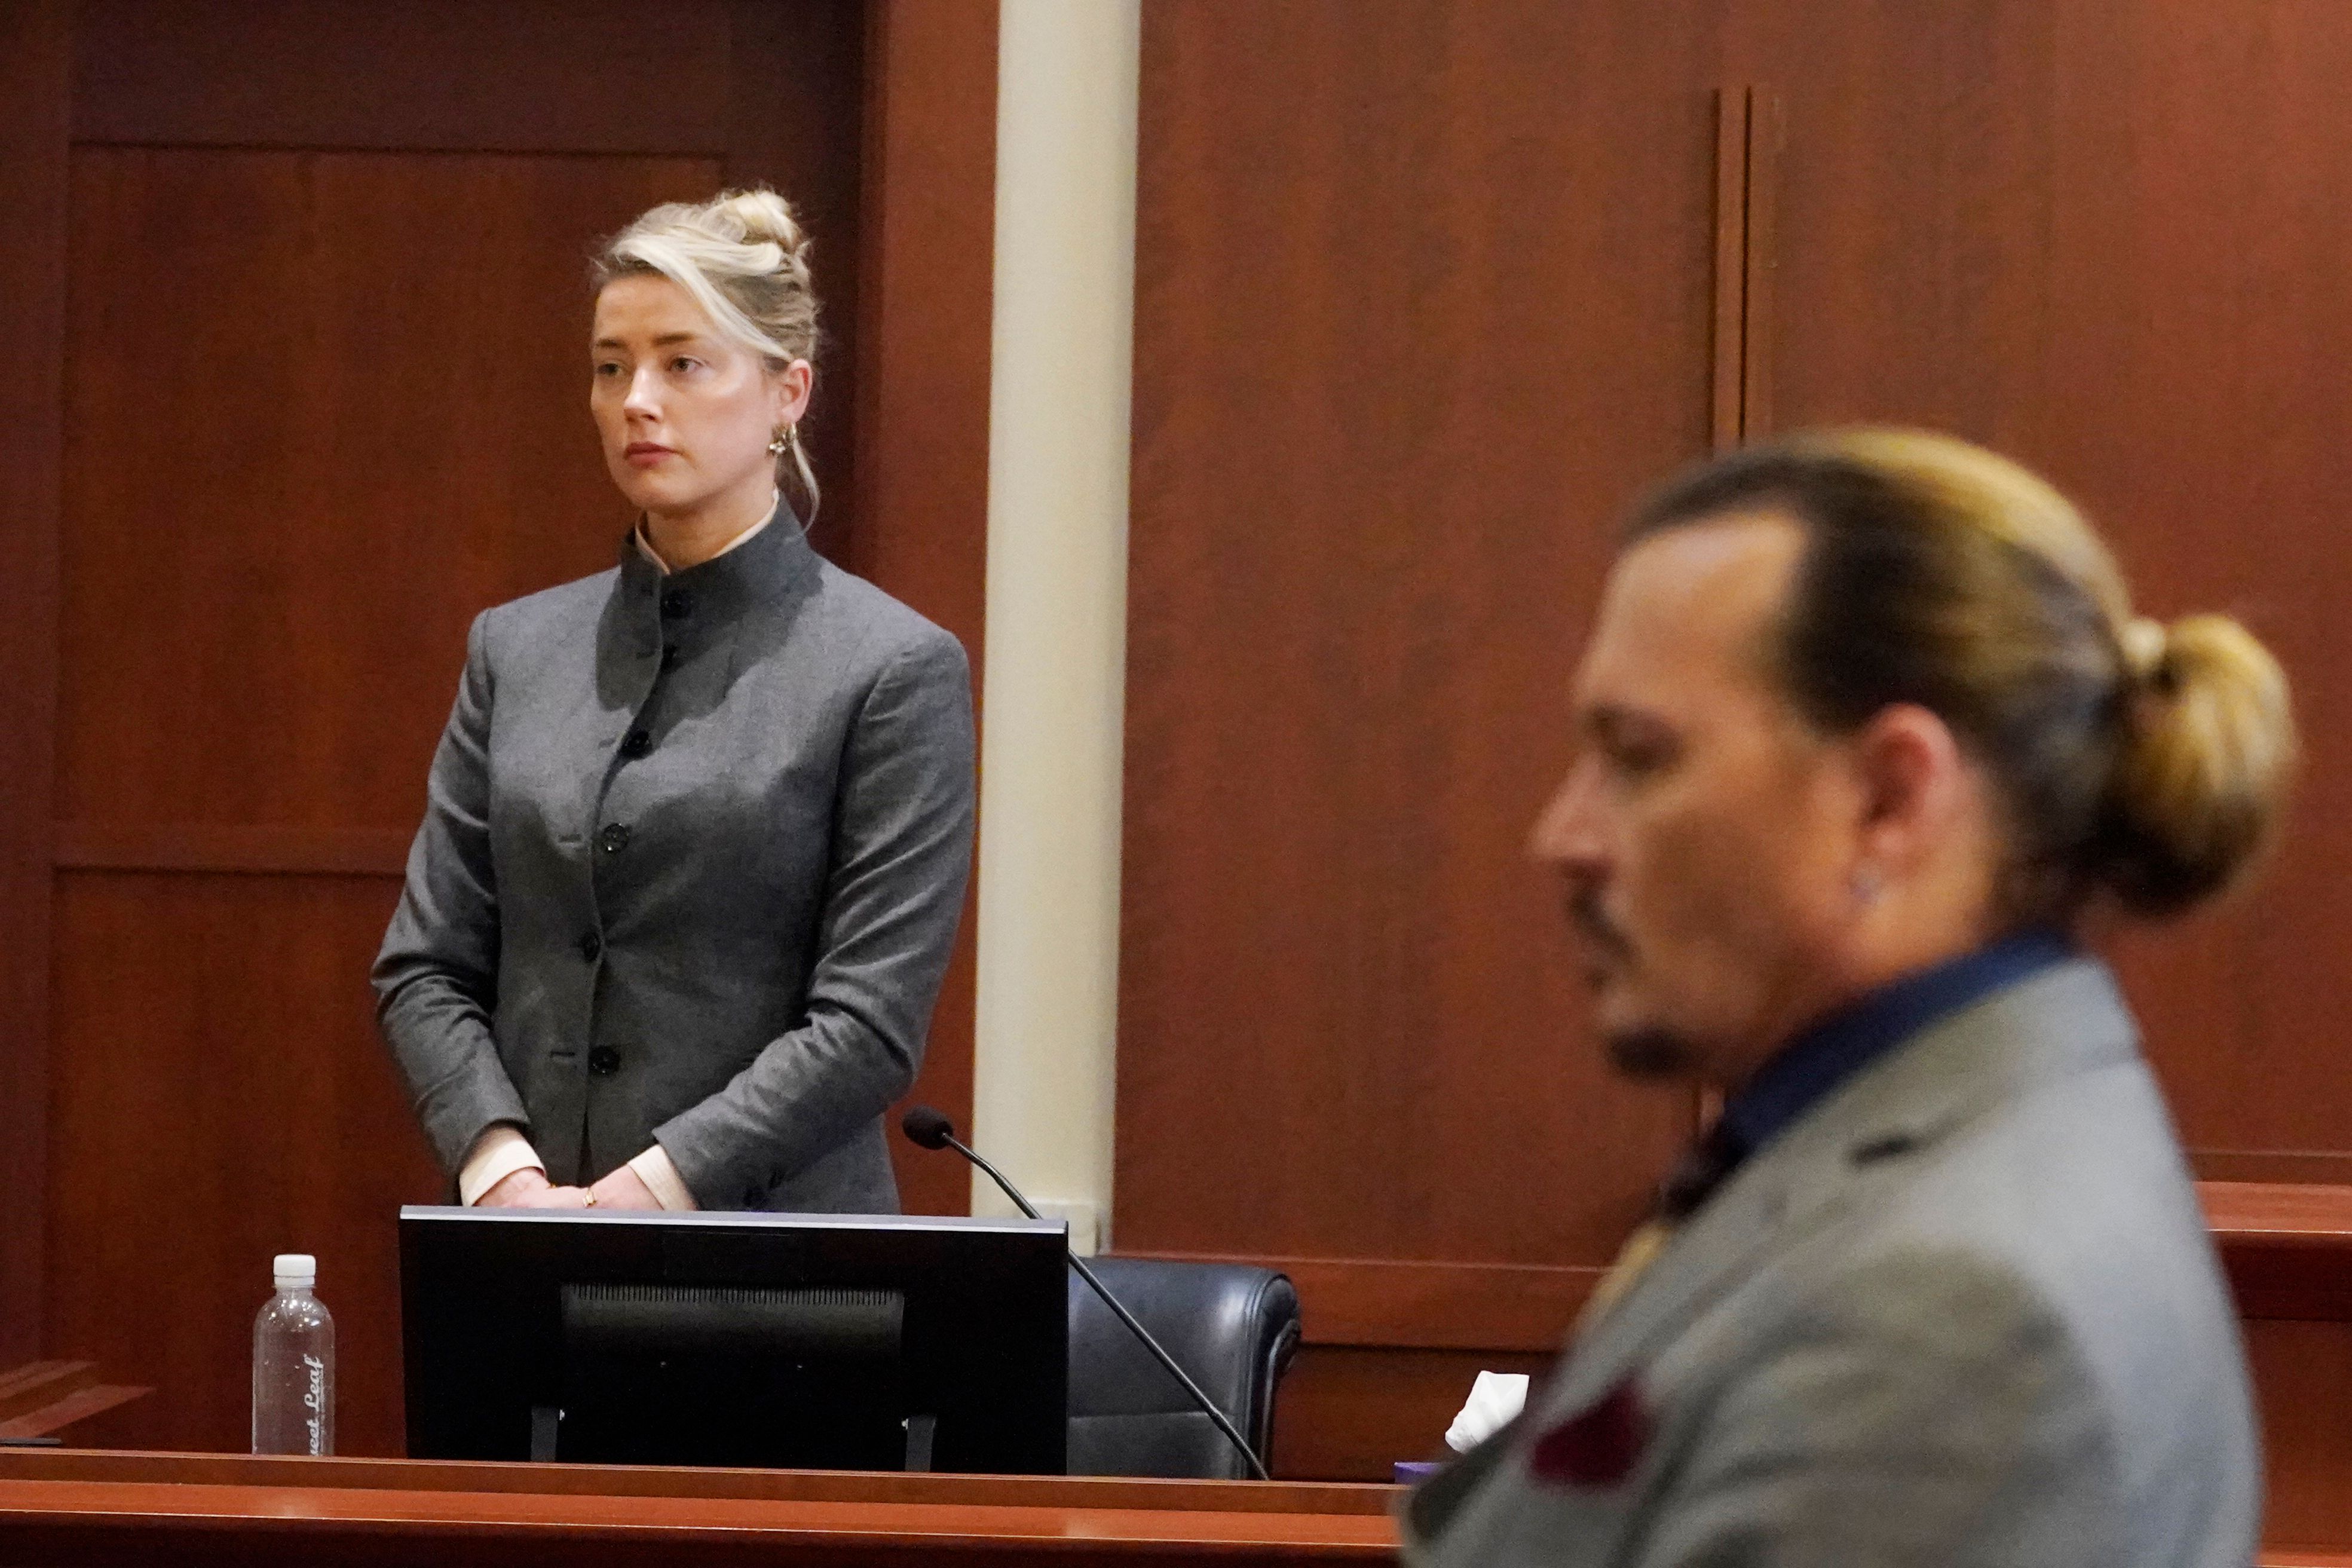 Amber Heard and Johnny Depp watch as the jury leaves the courtroom at the end of the day at the Fairfax County Circuit Courthouse on May 16, 2022, in Fairfax, Virginia. | Source: Getty Images